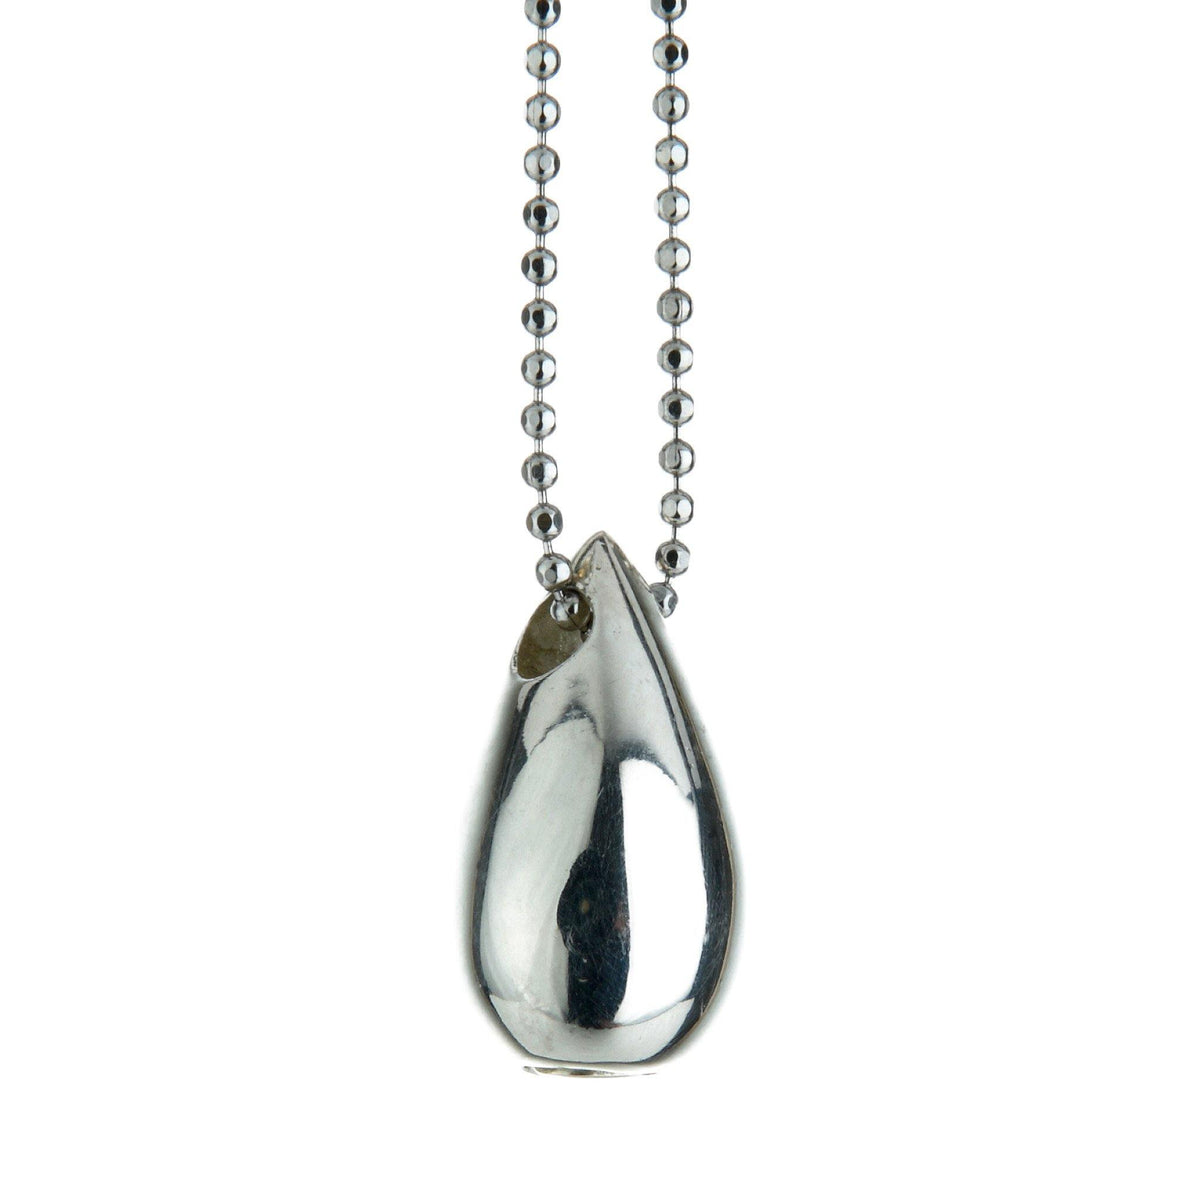 Mayfair Small Teardrop Cremation Ashes Pendant 925 Silver Urns UK